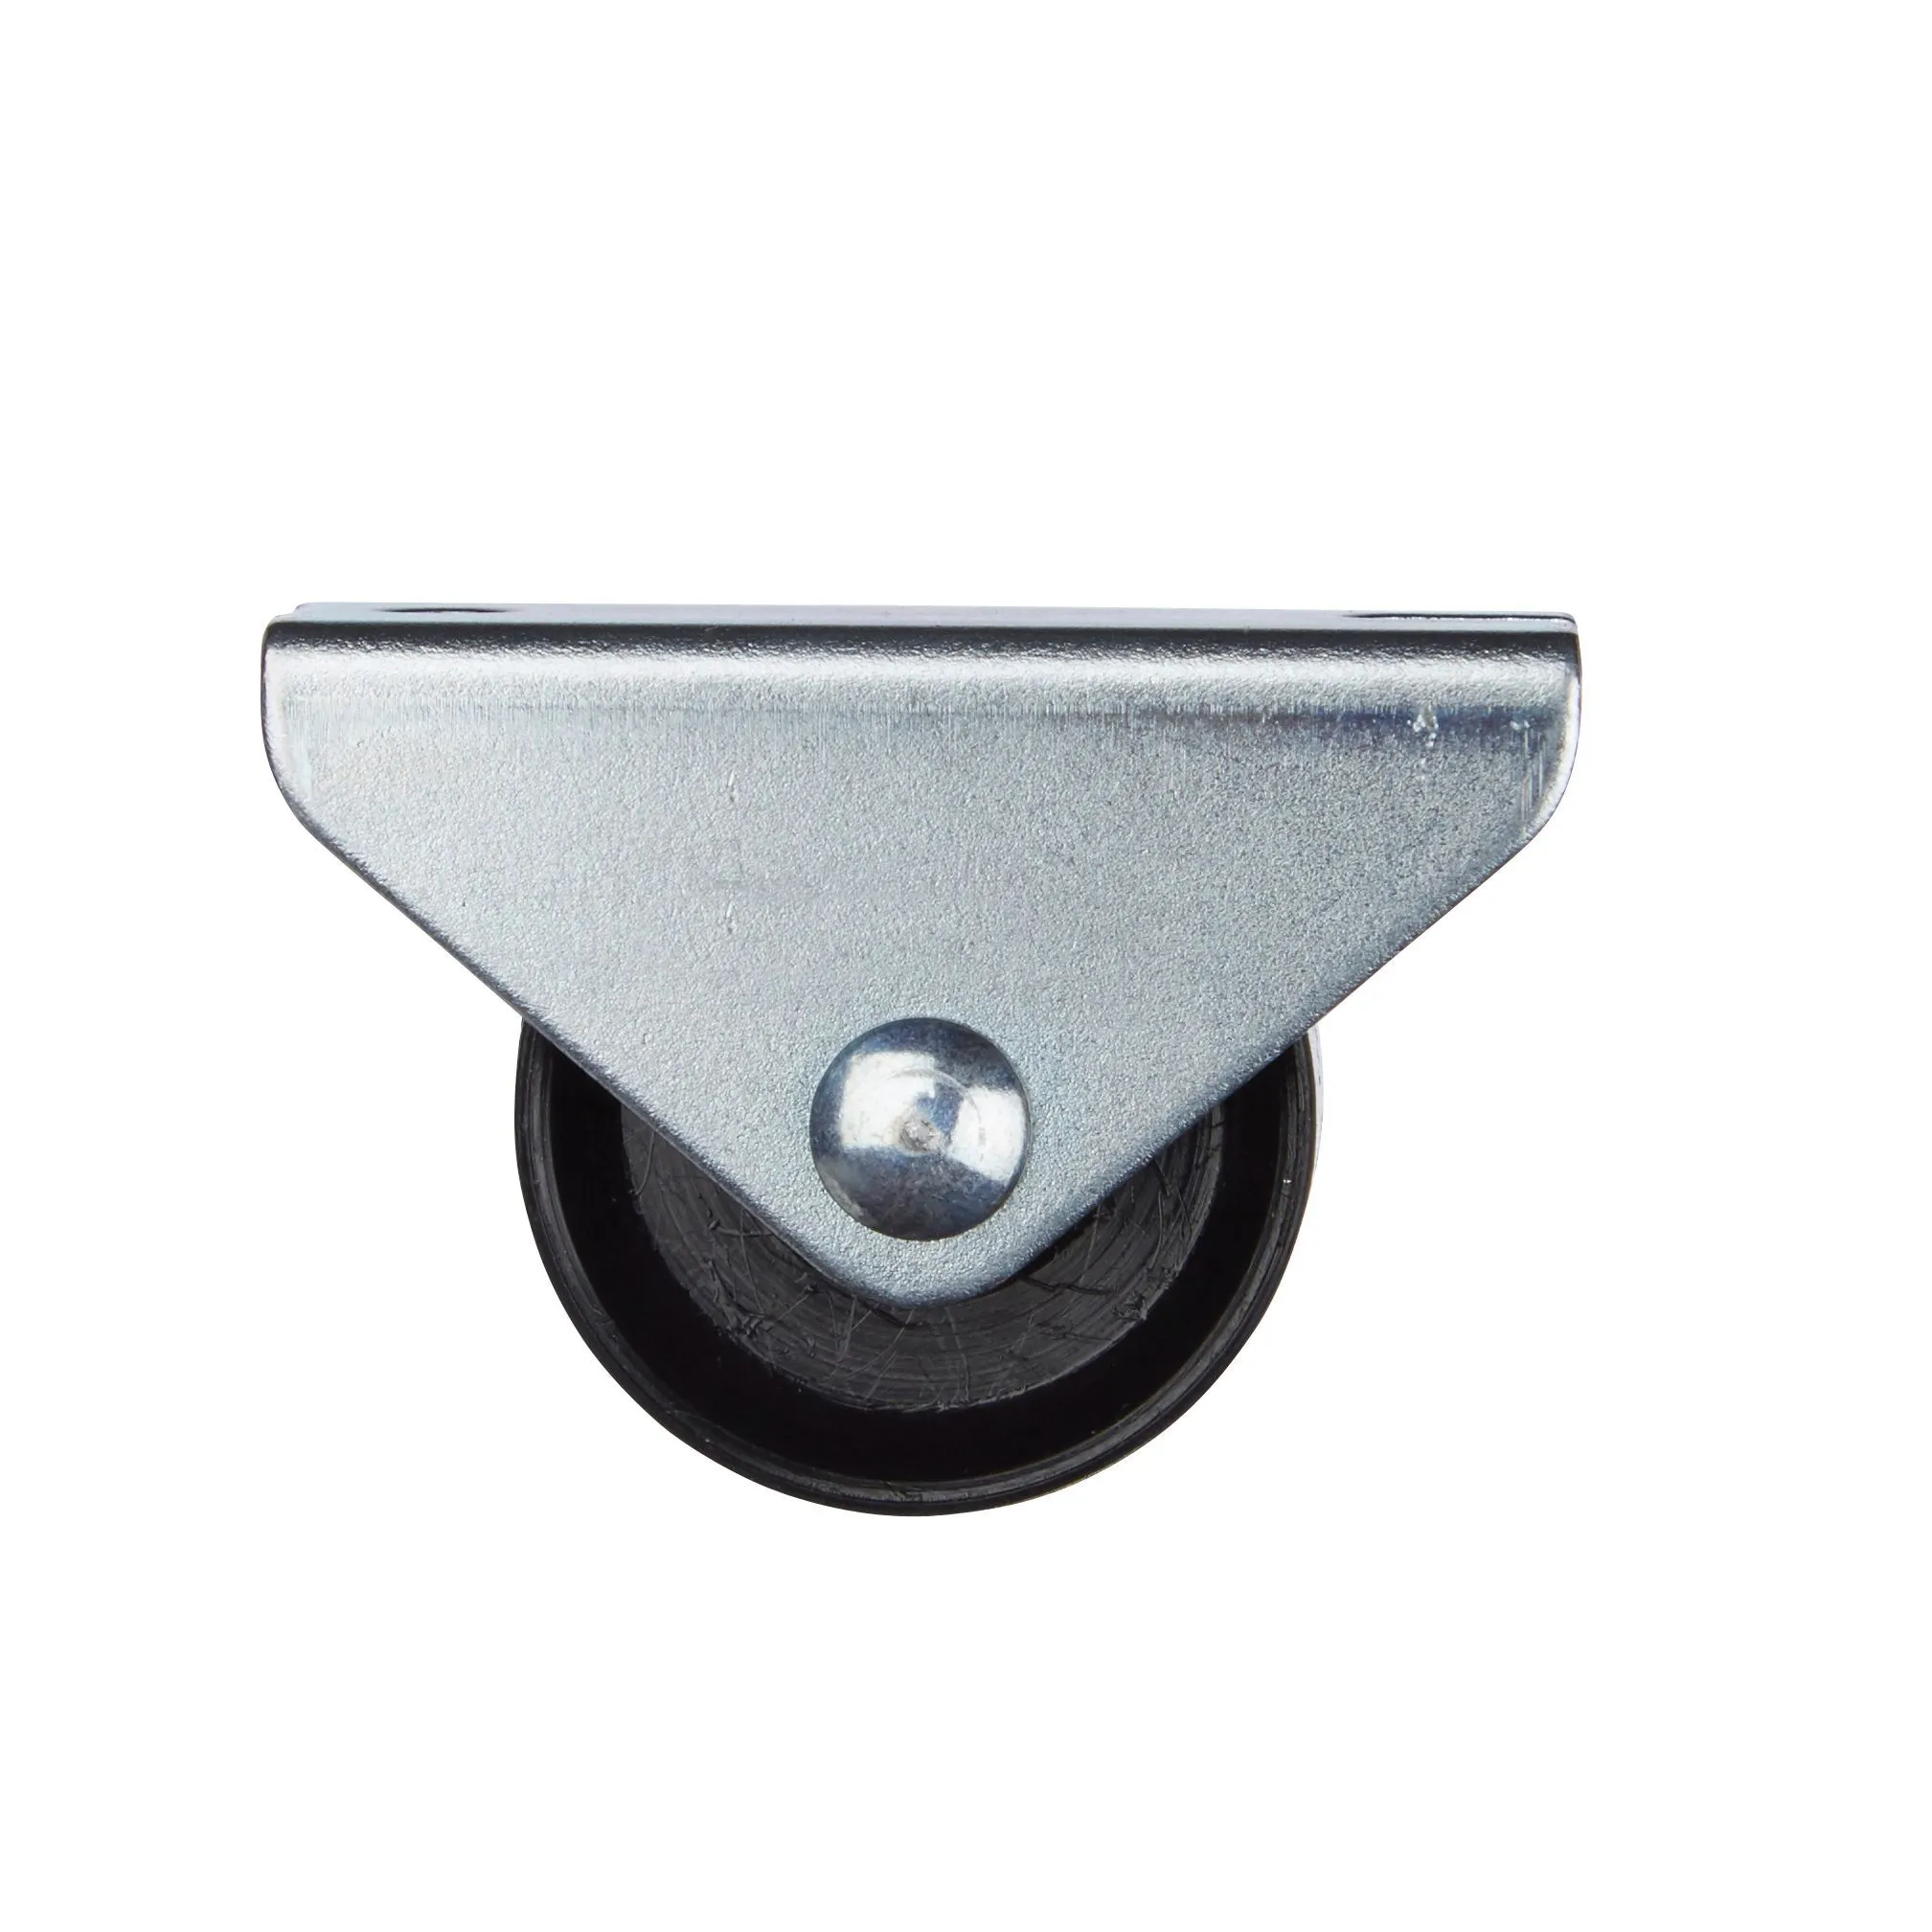 Tente Zinc-plated Fixed Castor 96265700, (Dia)25mm (H)28mm (Max. Weight)25kg